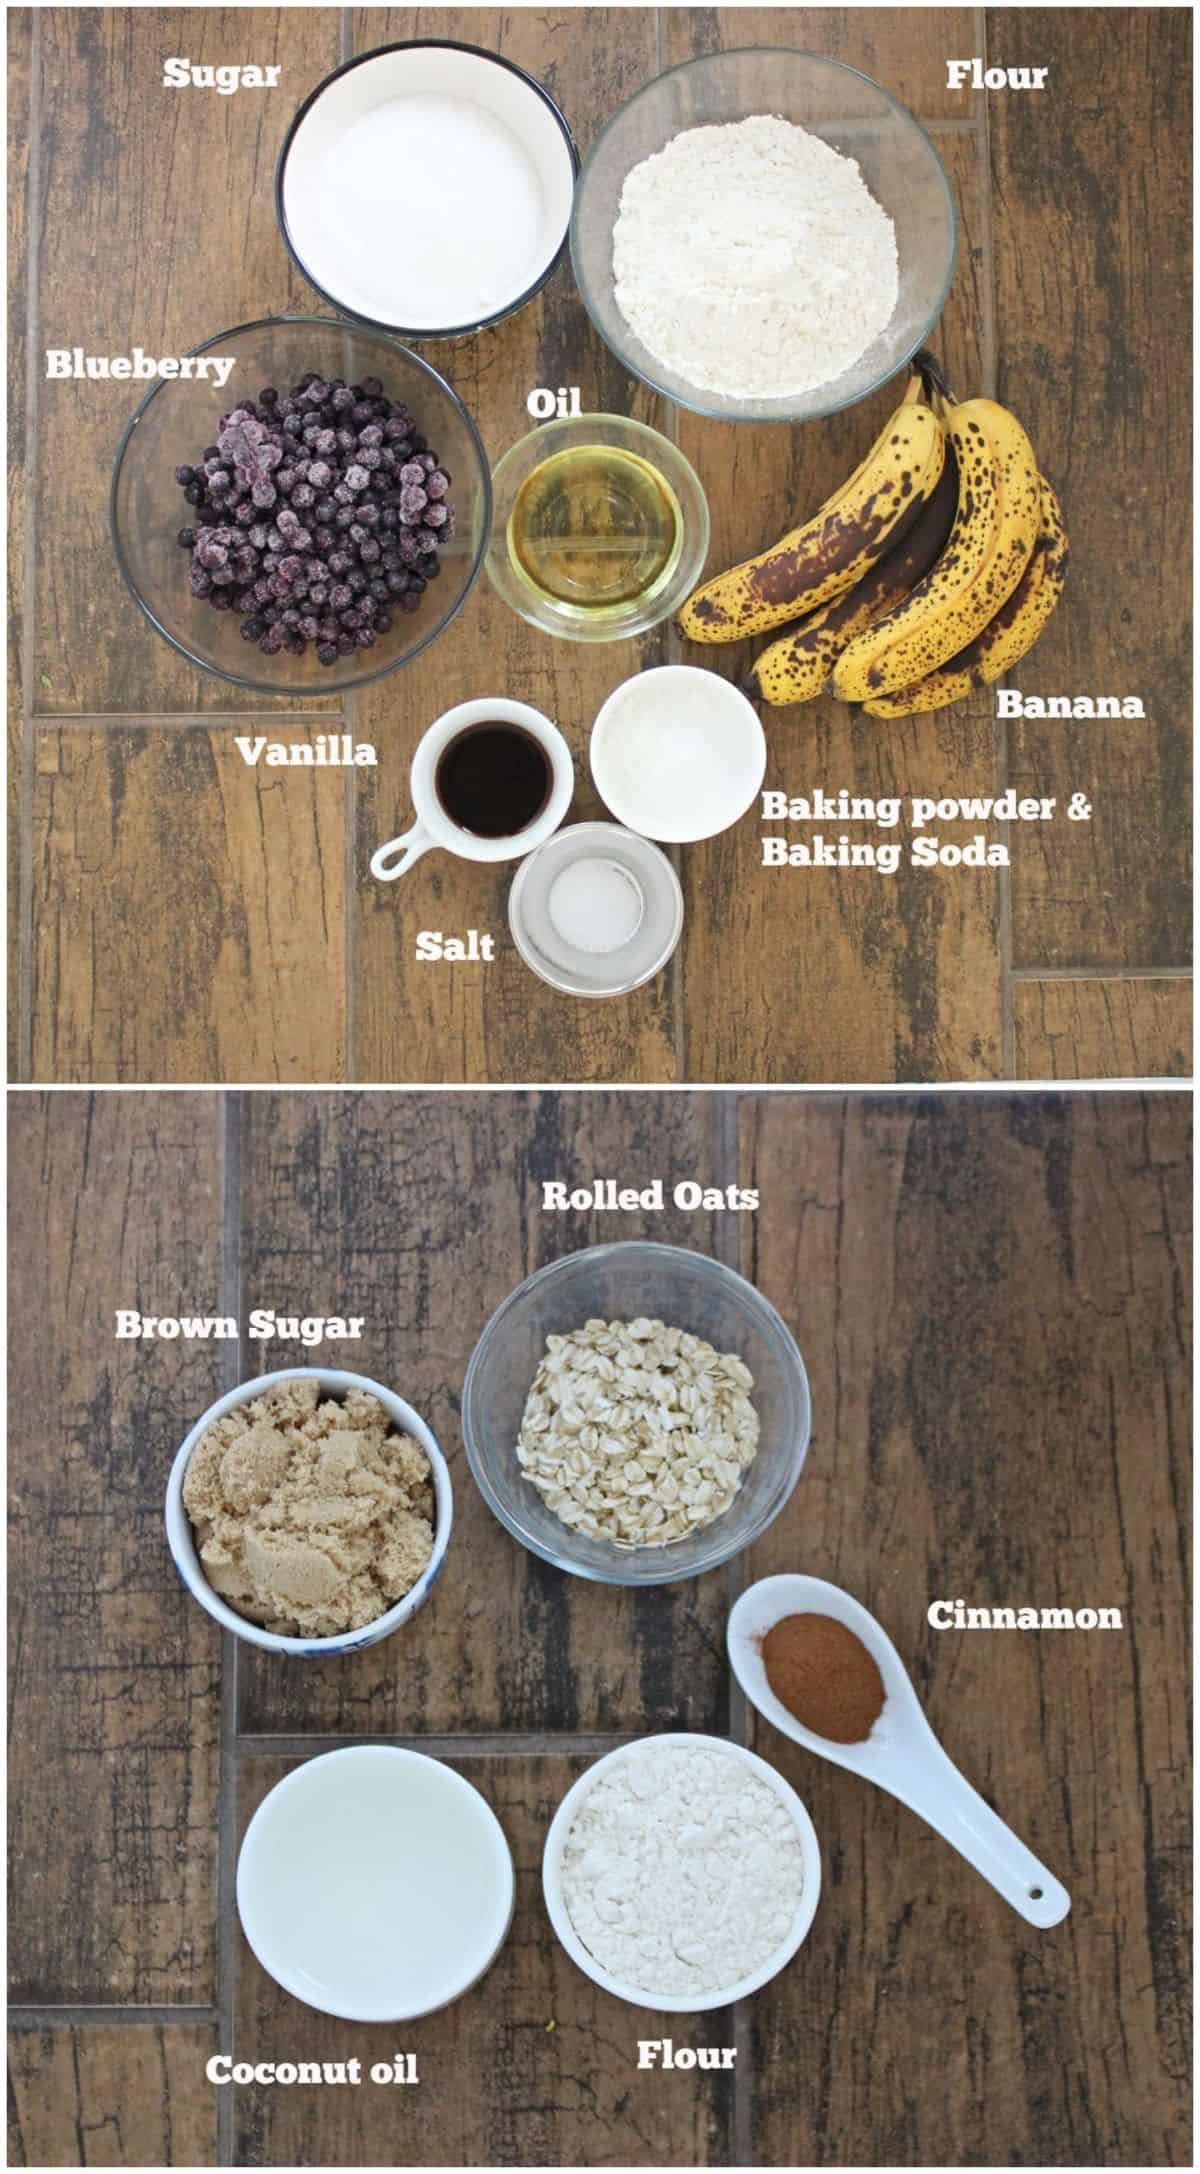 ingredients laid out to make Blueberry banana muffin and crumb topping